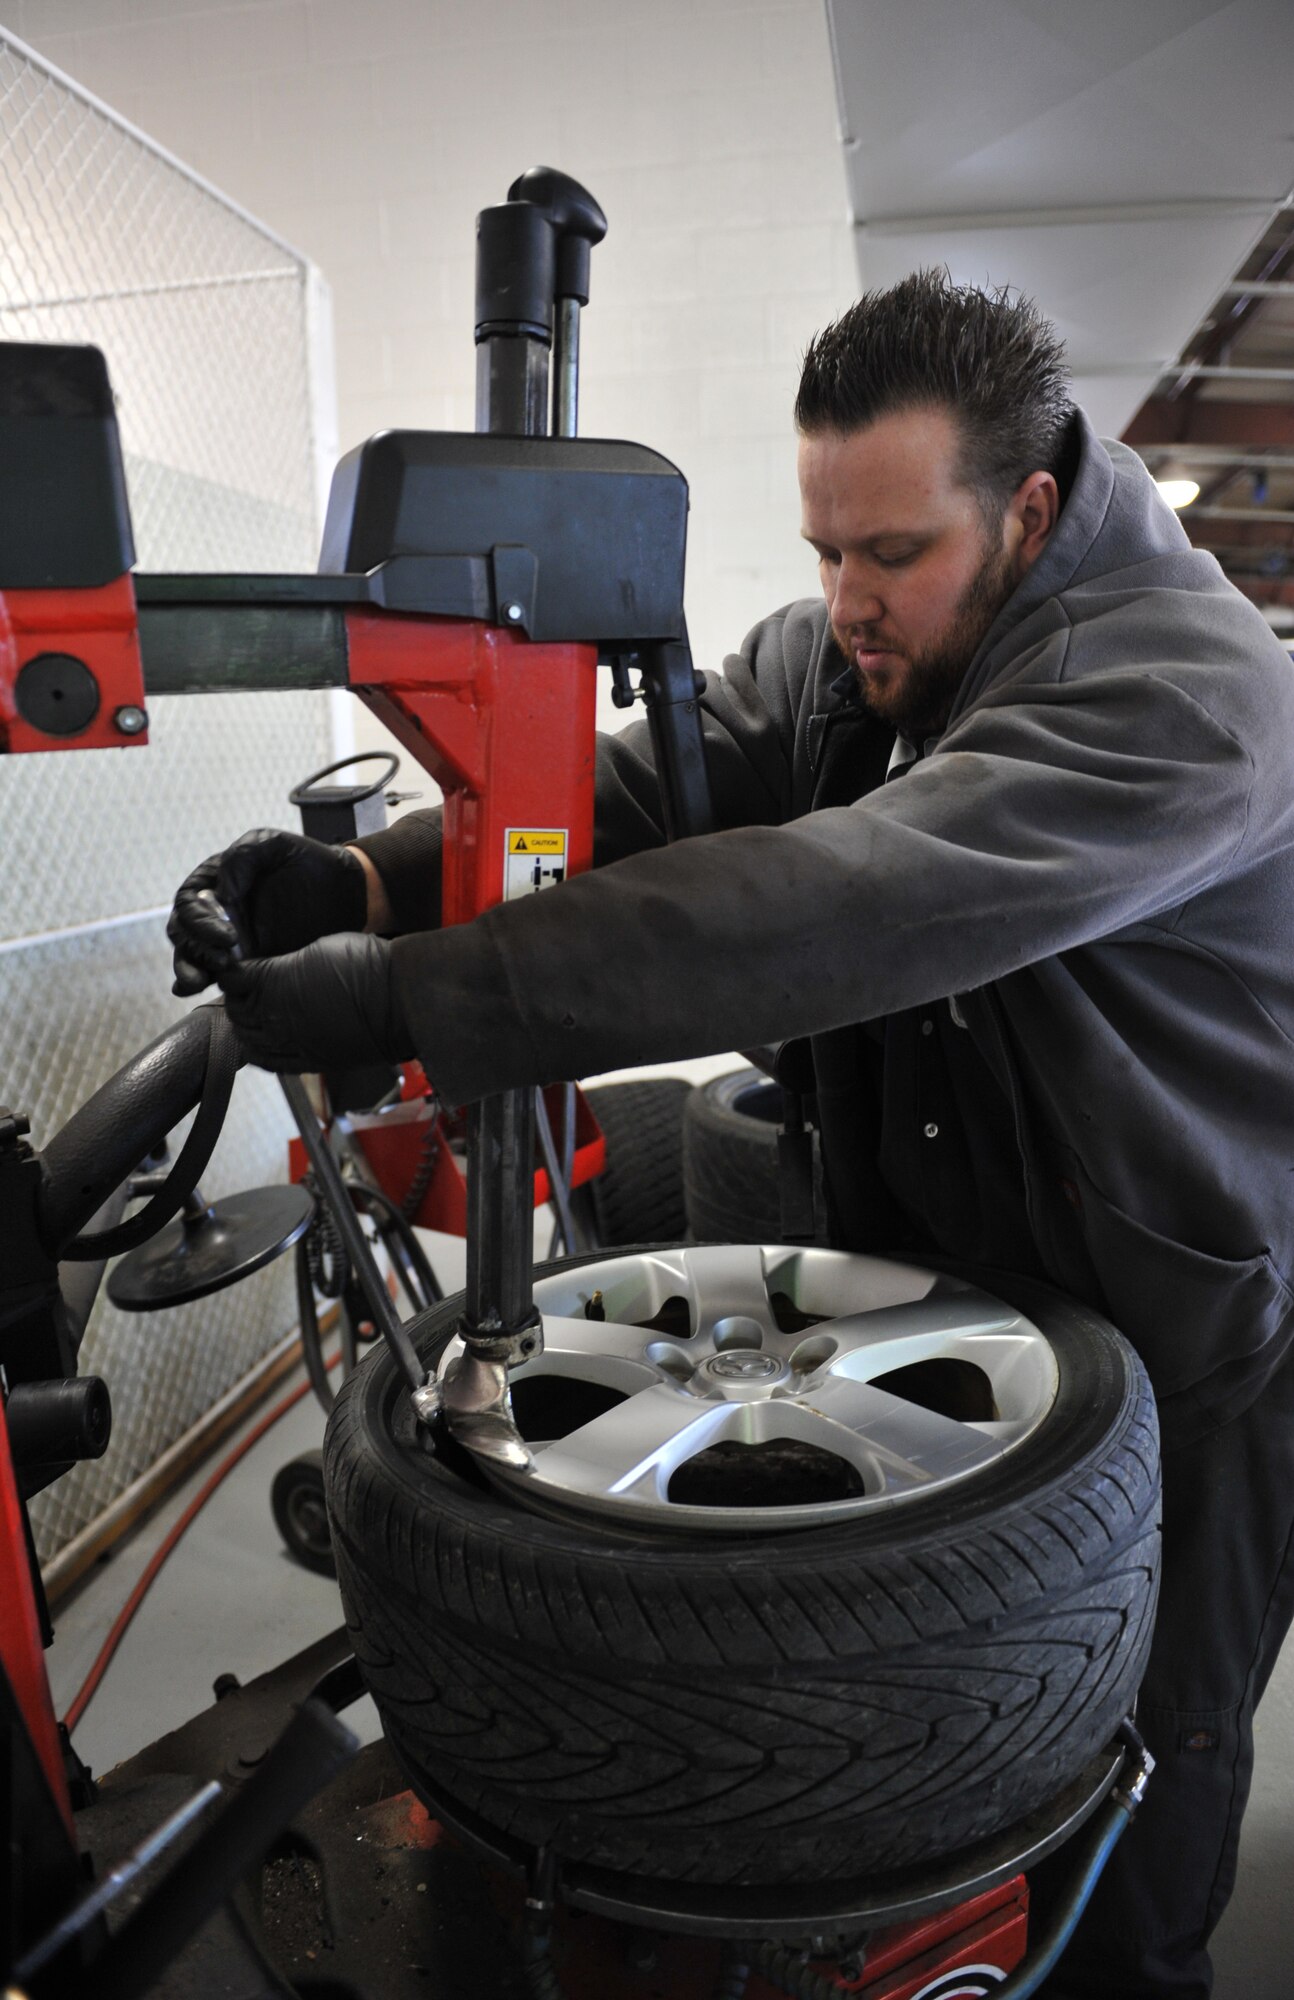 Jacob Gooden, 509th Force Support Squadron Spirit Auto automotive technician, changes out a tire at Whiteman Air Force Base, Mo., March 13, 2013. Spirit Auto is a one-stop shop that aims to provide honest, reliable and quality customer service. (U.S. Air Force photo by Heidi Hunt/Released)